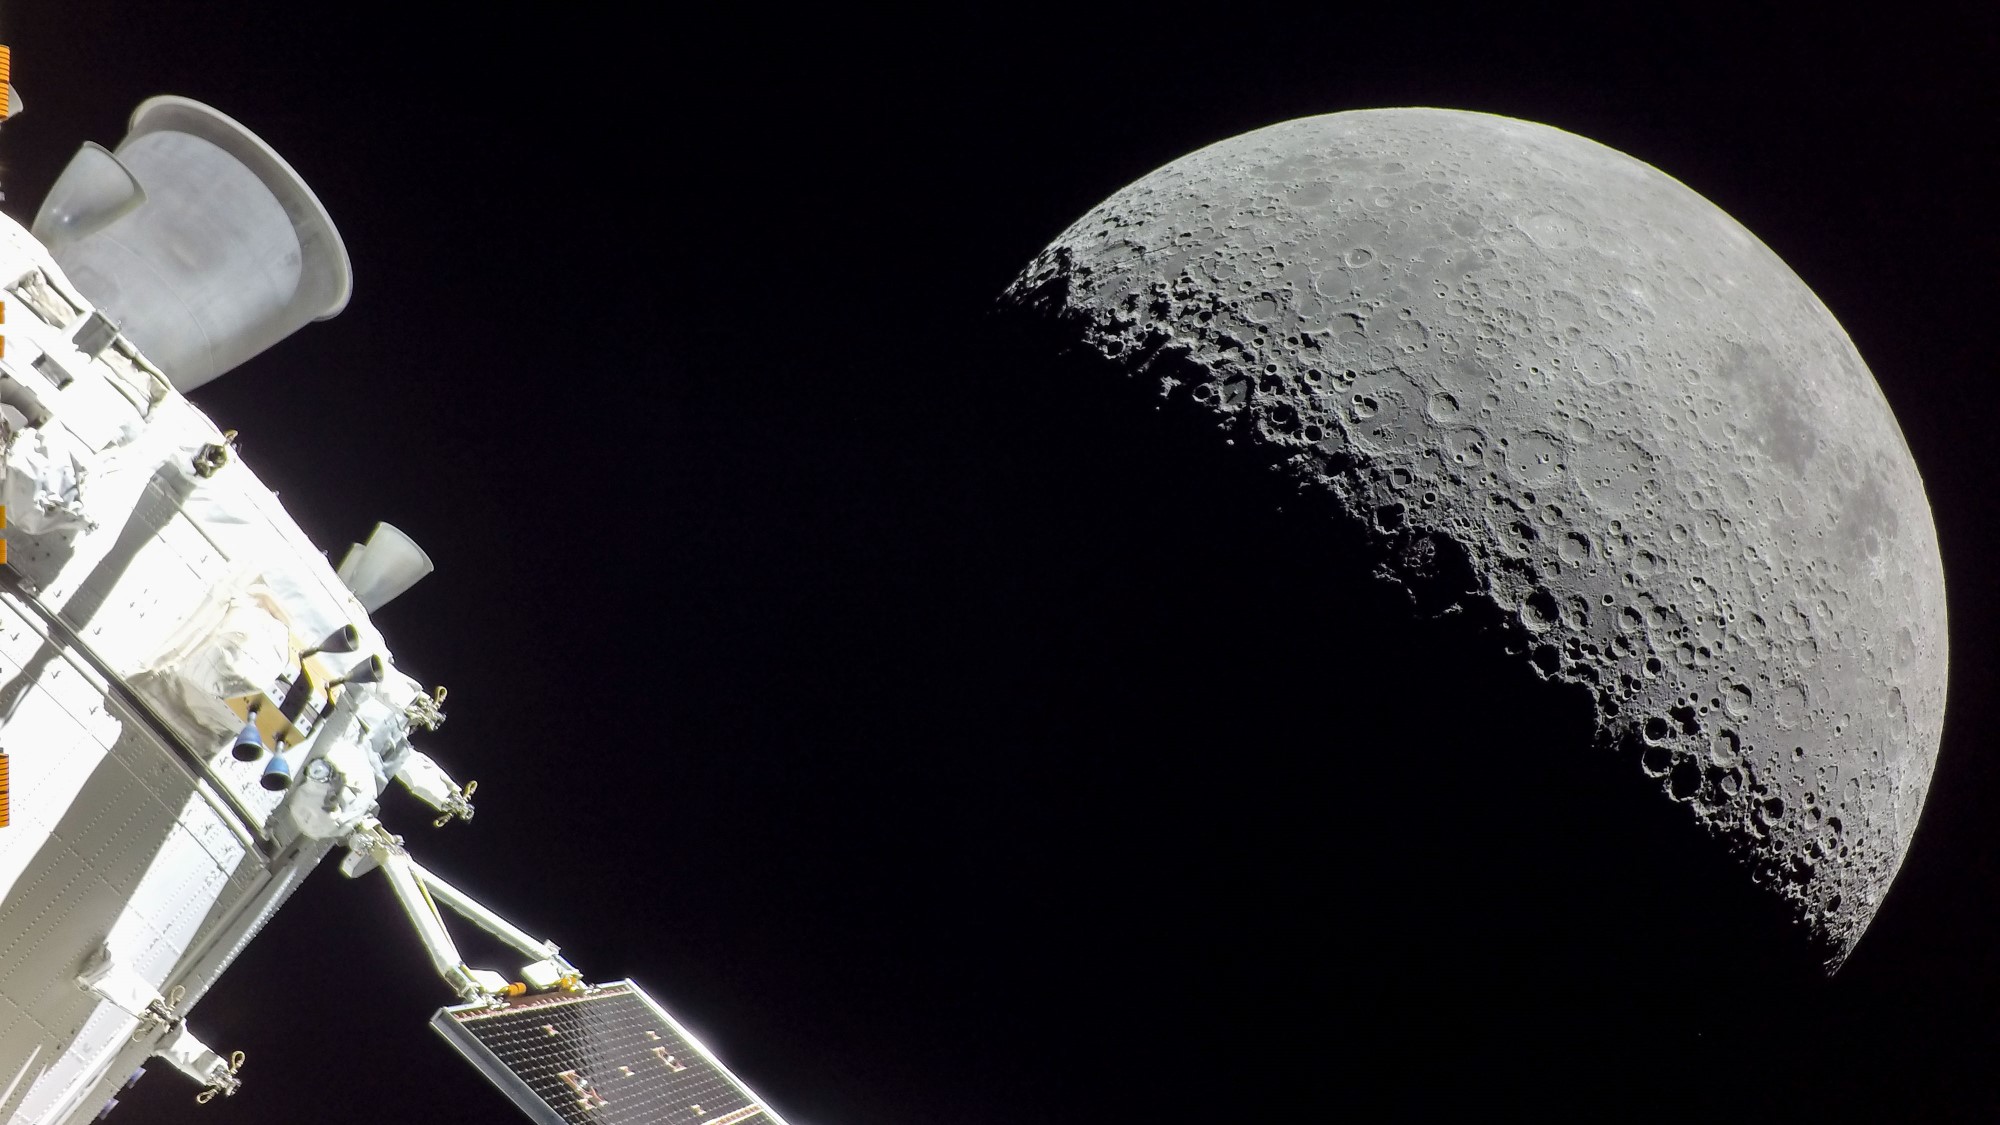 Moon scientists hail Artemis opportunities while still learning from Apollo